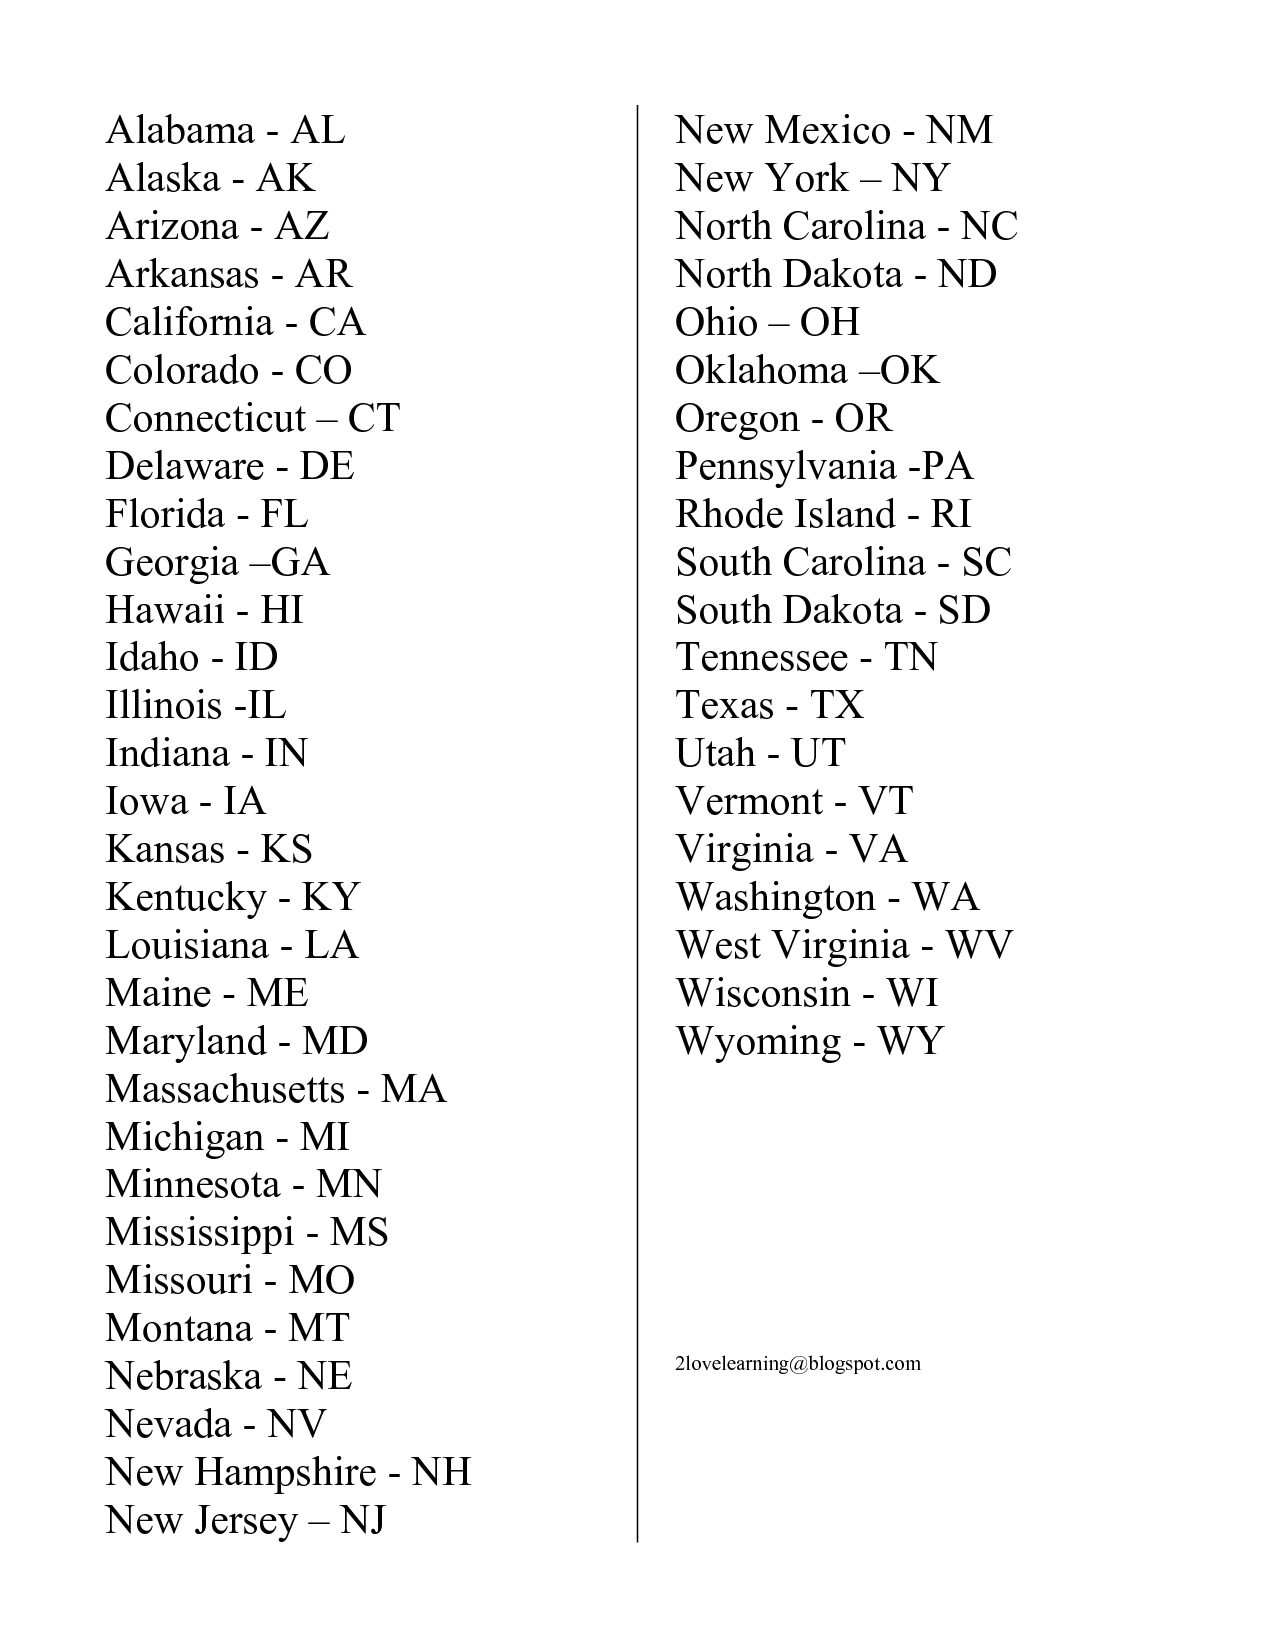 printable-list-of-state-abbreviations